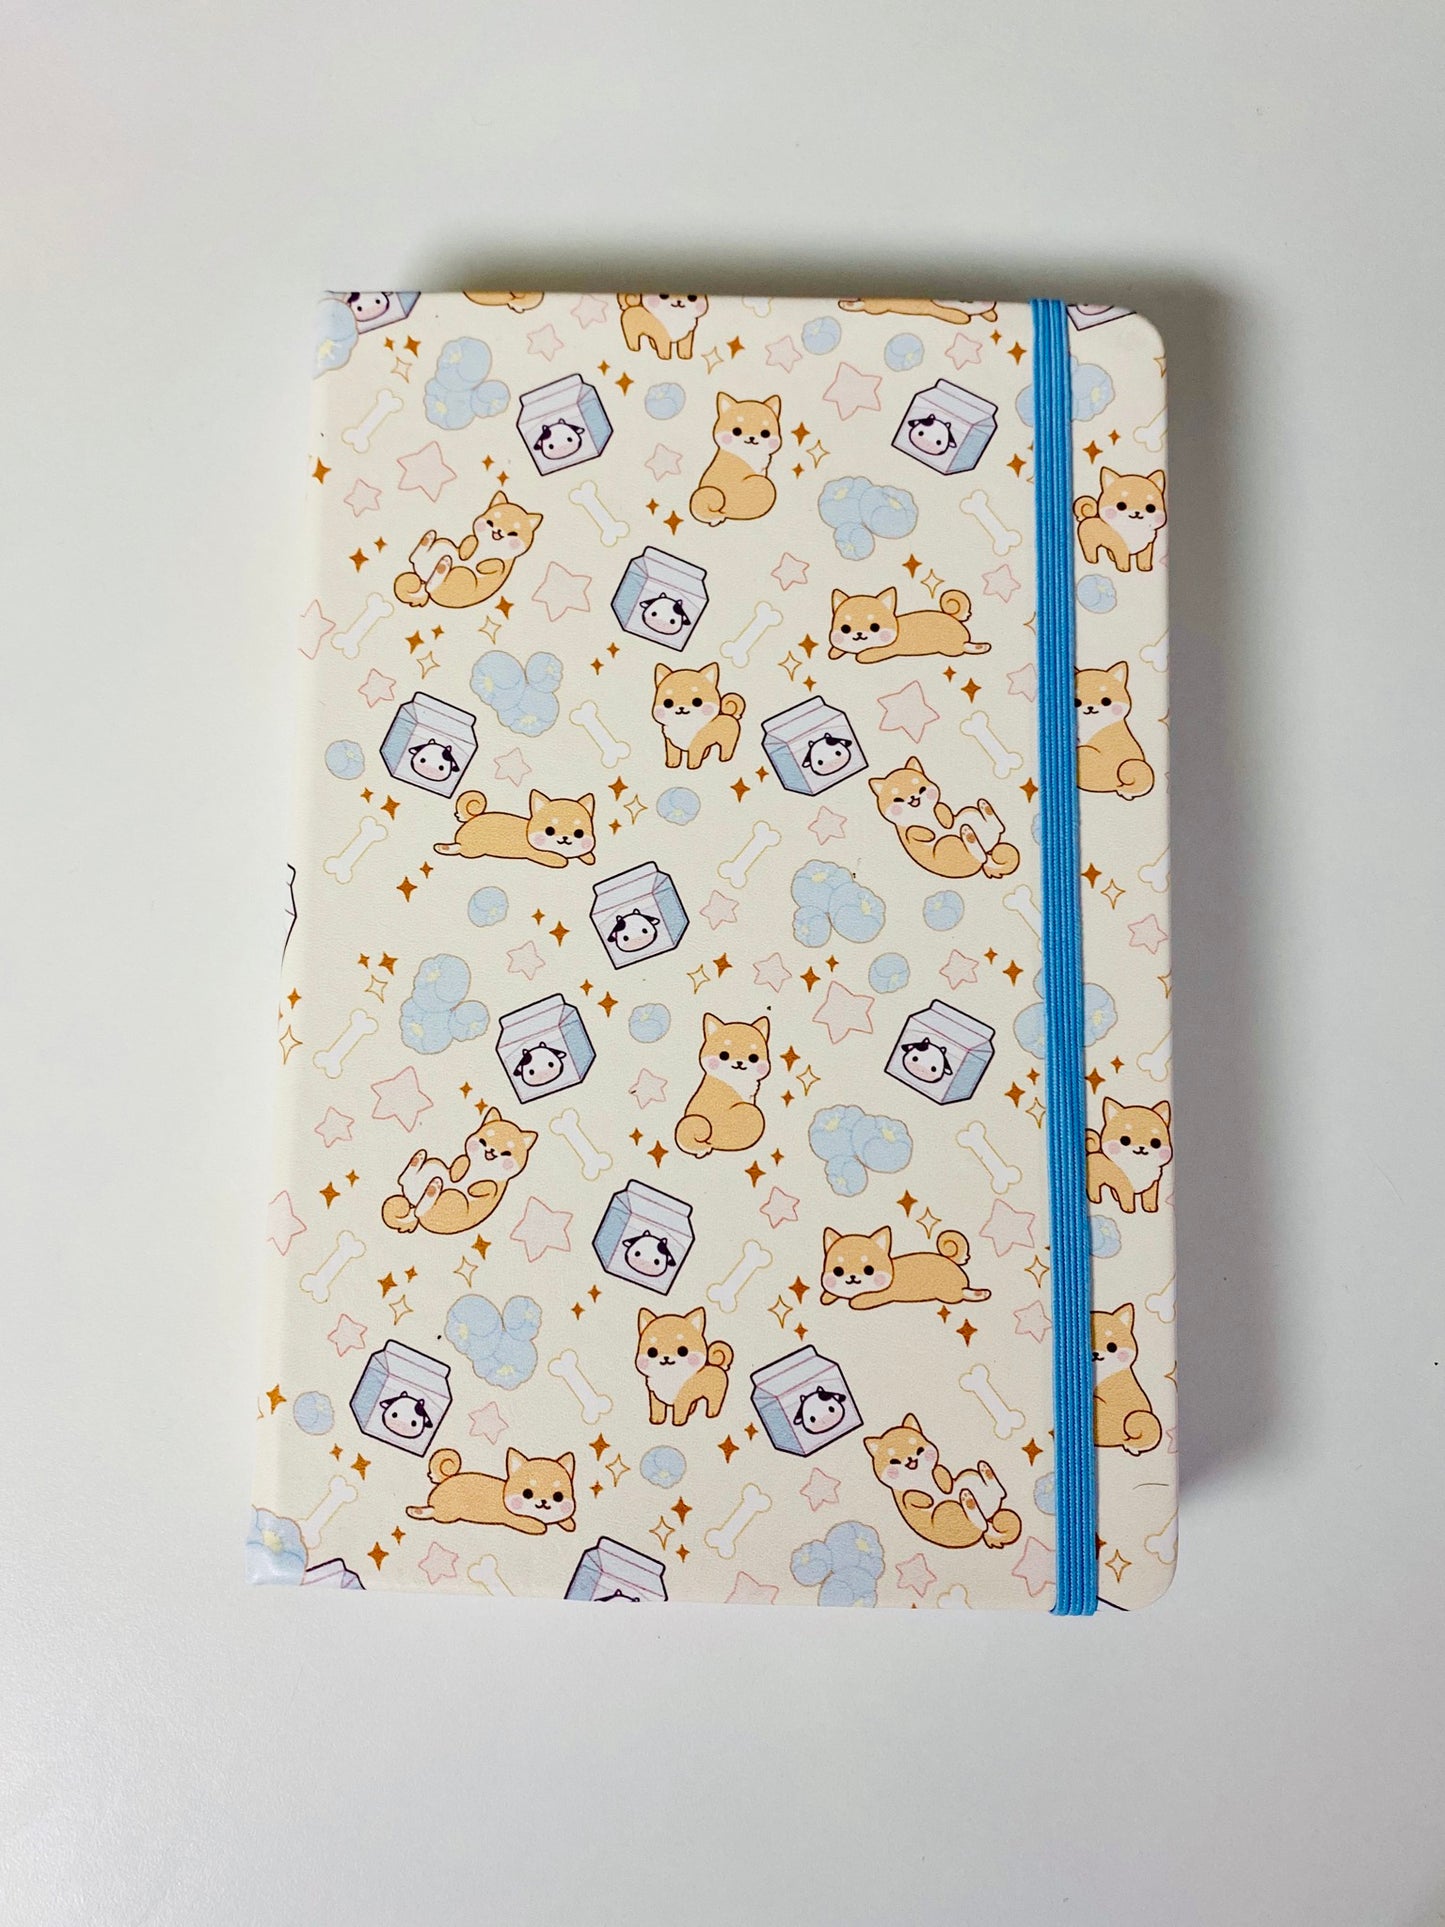 Milk and Shiba Puppies PU Faux leather Watercolor Sketchbook Blank 300gsm 40sheets/80pages Hard Cover